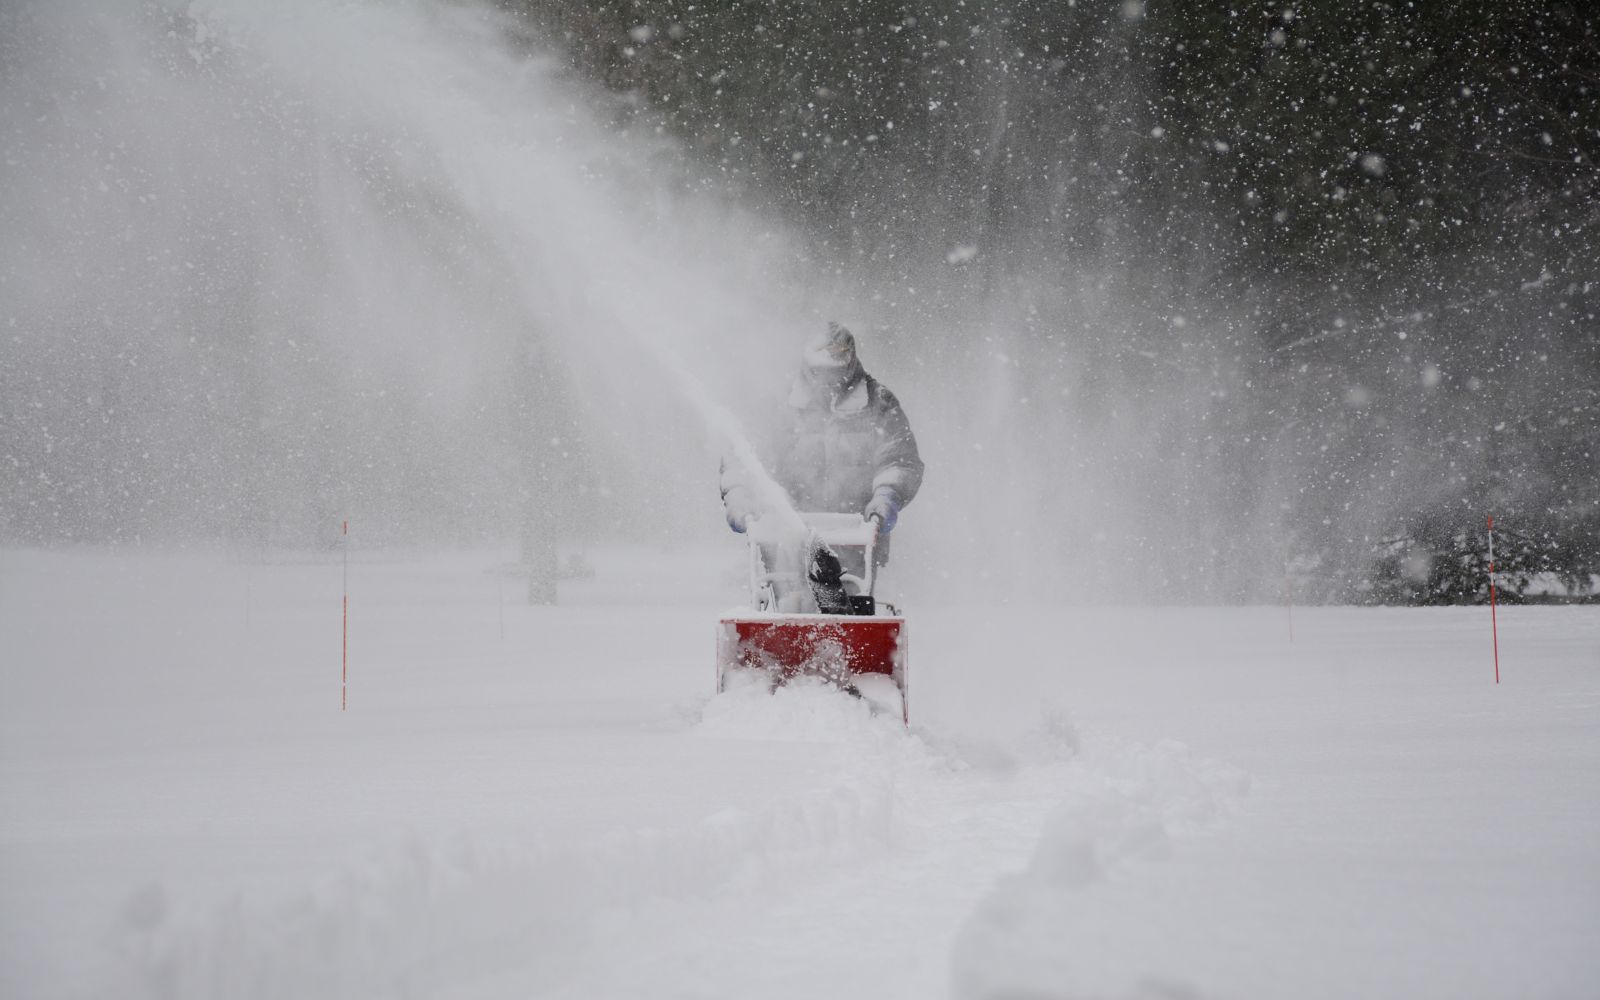 Man Blowing Snow With Electric Blower